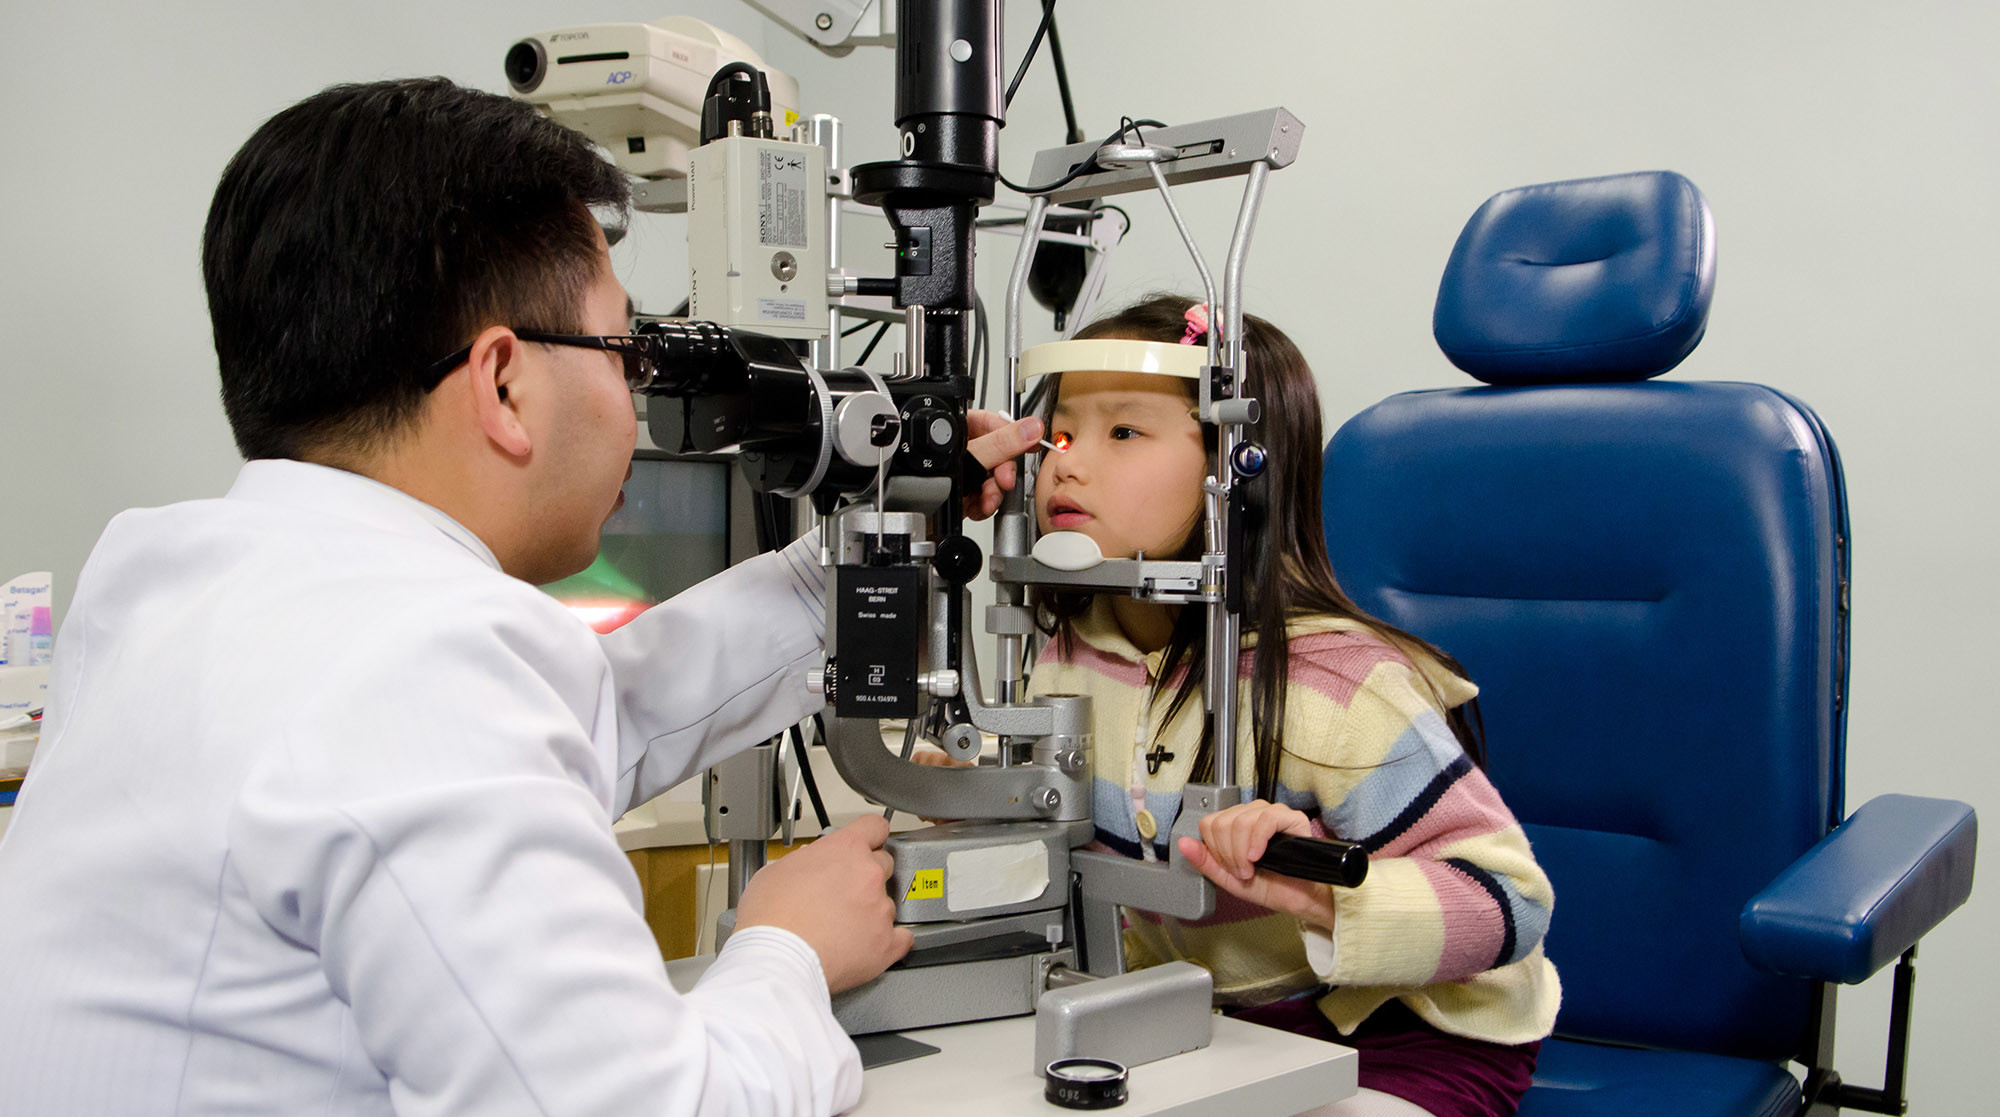 Our programme will provide eye examinations for 30,000 children aged 6-8 years old.